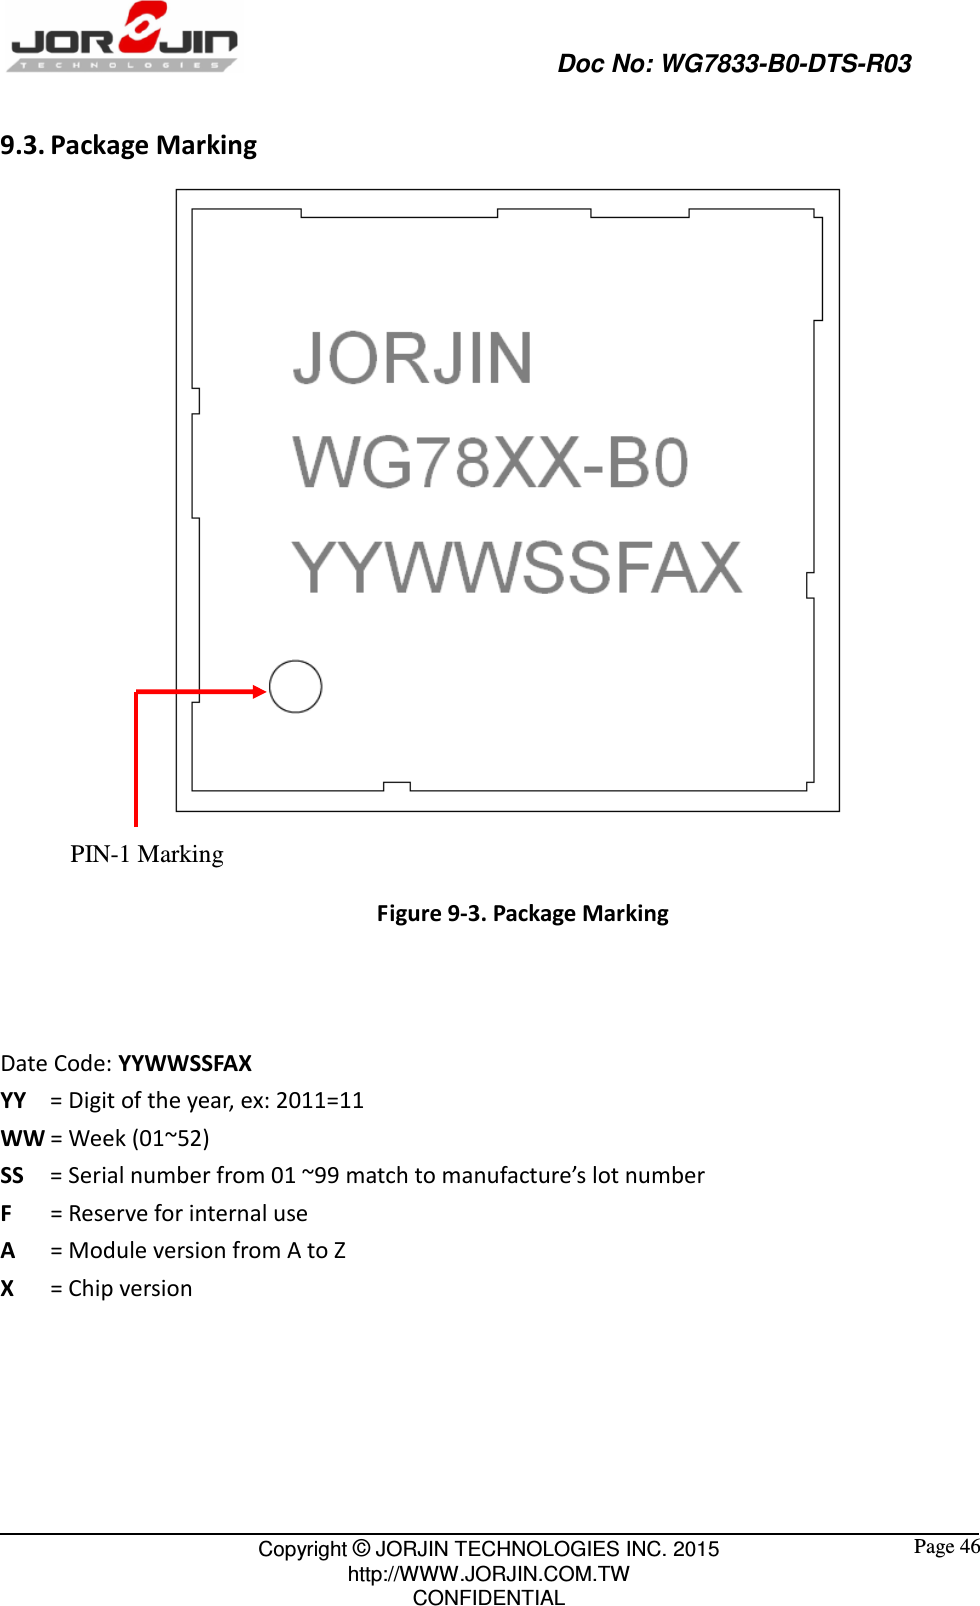                                                   Doc No: WG7833-B0-DTS-R03                                                                                                 Copyright © JORJIN TECHNOLOGIES INC. 2015 http://WWW.JORJIN.COM.TW CONFIDENTIAL  Page 46 9.3. Package Marking    Figure 9-3. Package Marking    Date Code: YYWWSSFAX YY  = Digit of the year, ex: 2011=11 WW = Week (01~52) SS  = Serial number from 01 ~99 match to manufacture’s lot number F  = Reserve for internal use A  = Module version from A to Z X  = Chip version    PIN-1 Marking   